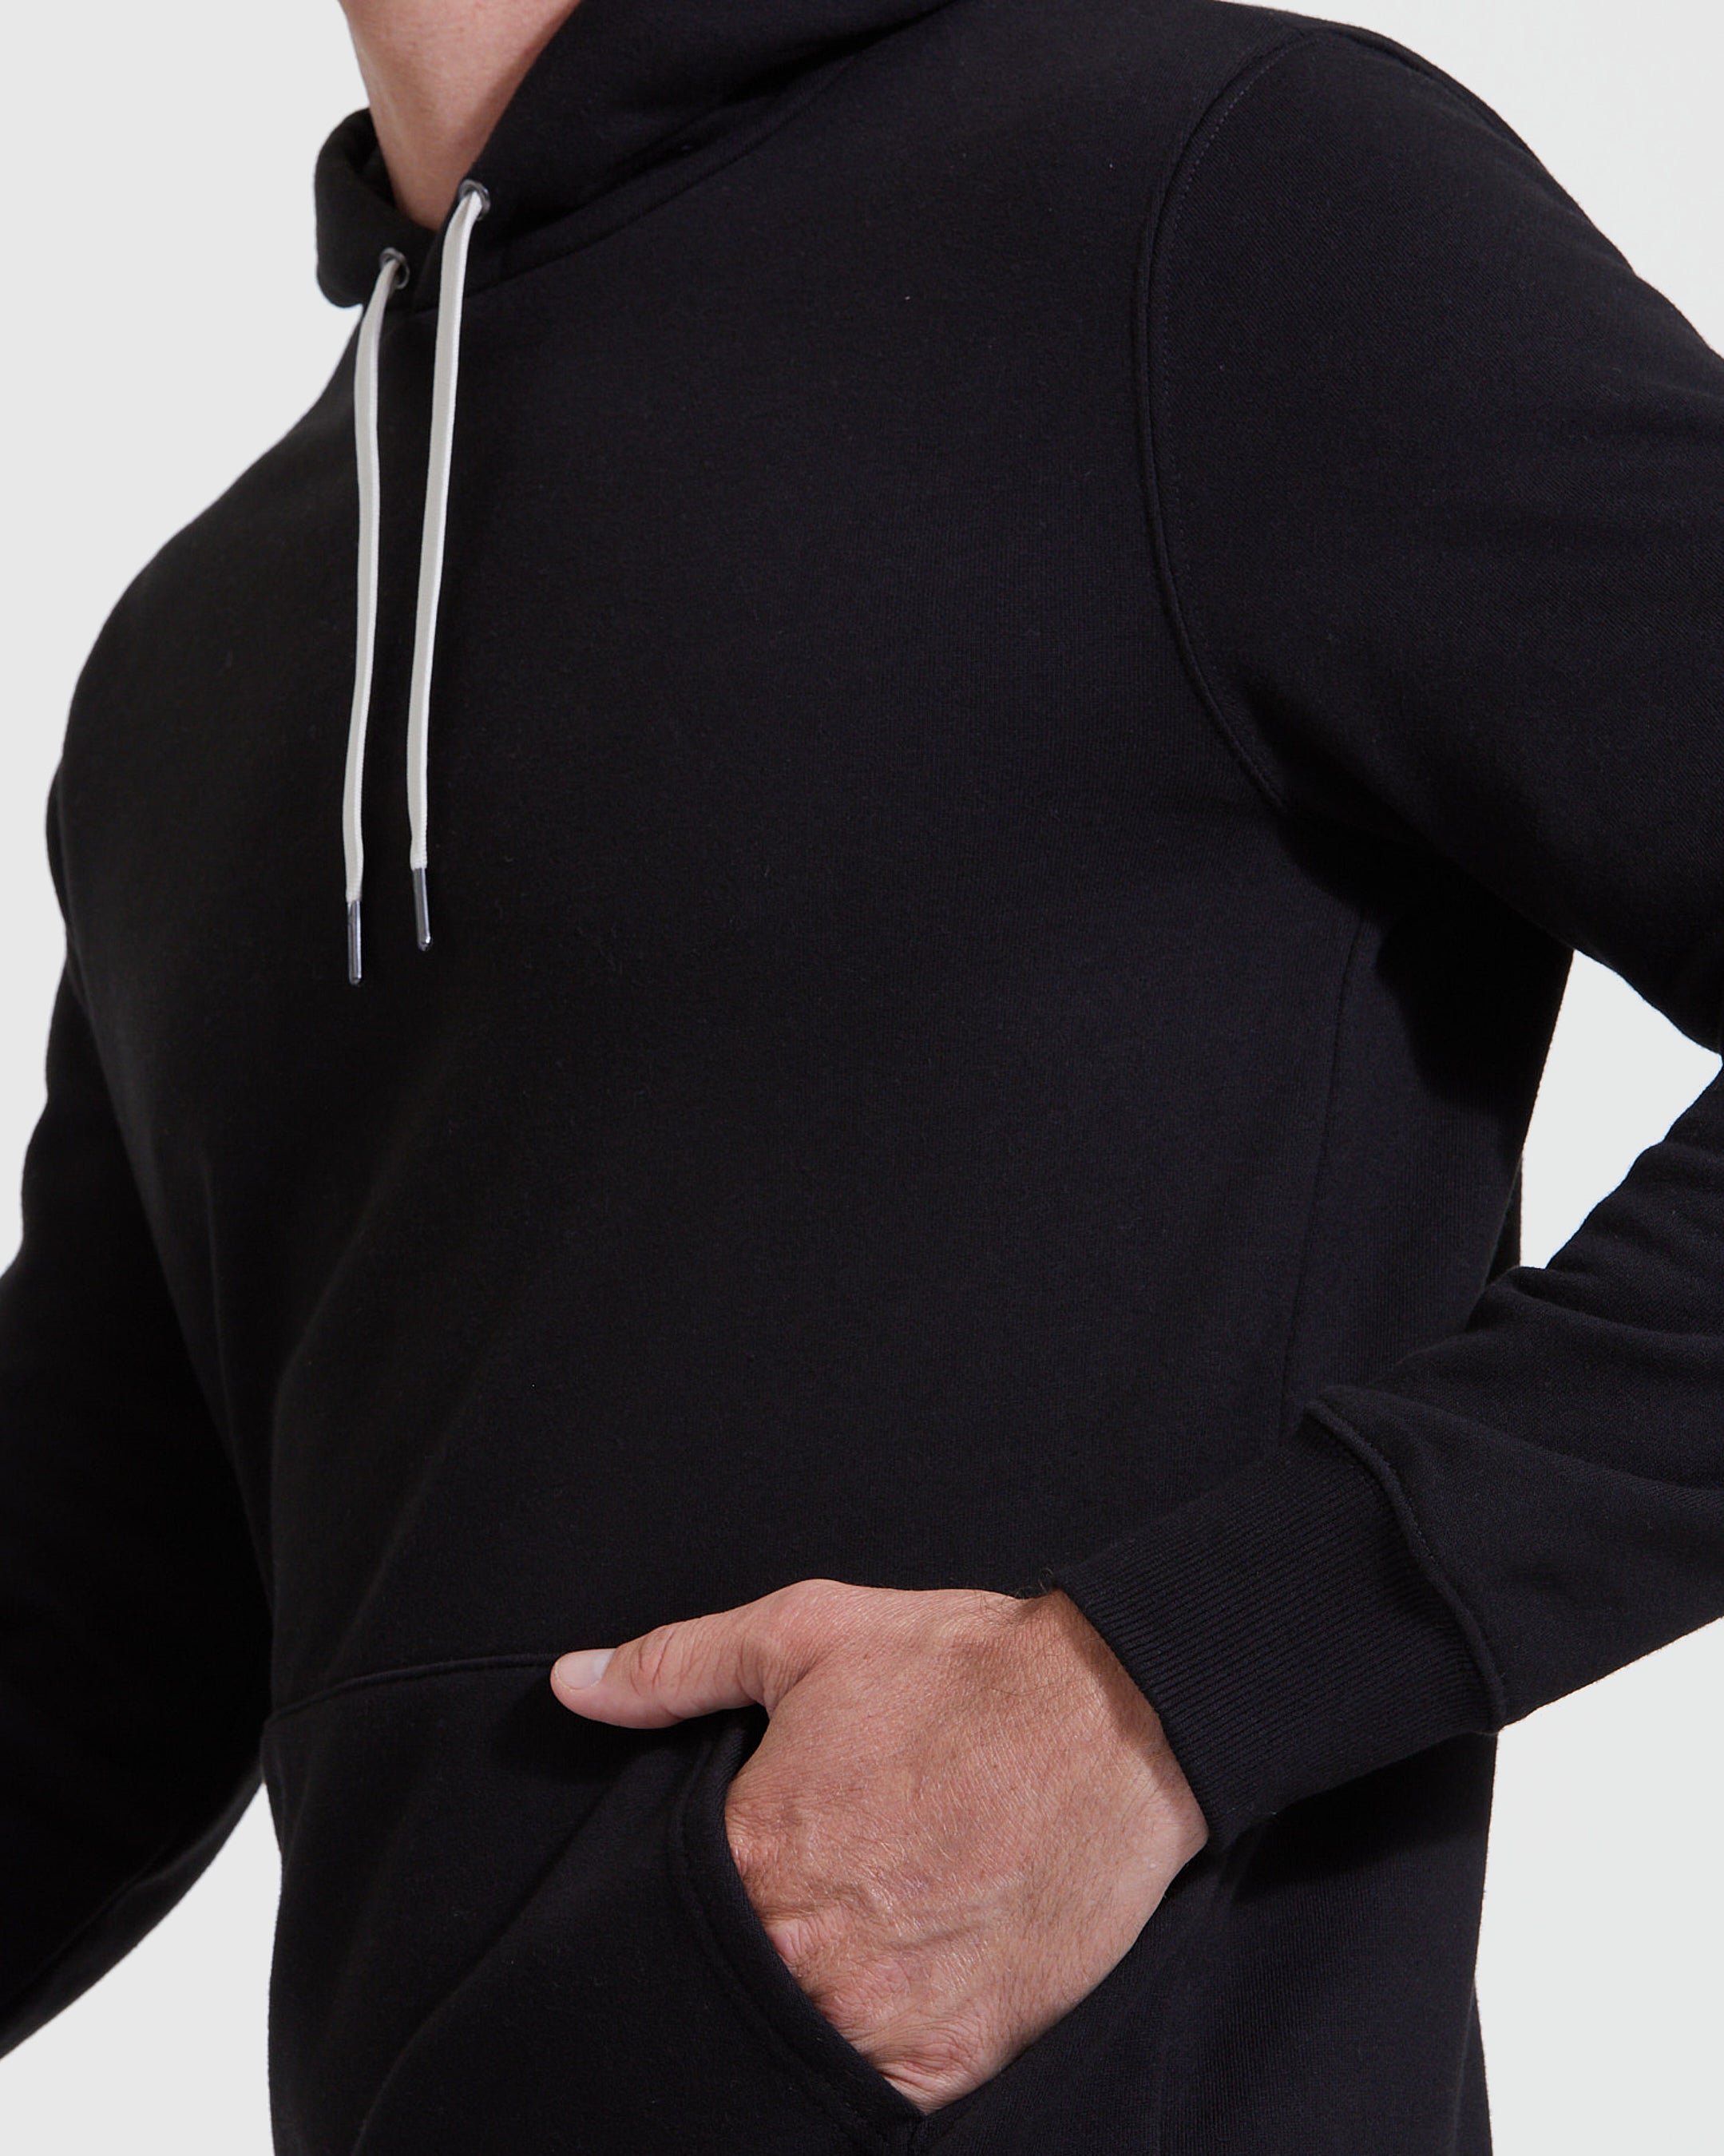 Black Fleece French Terry Pullover Hoodie